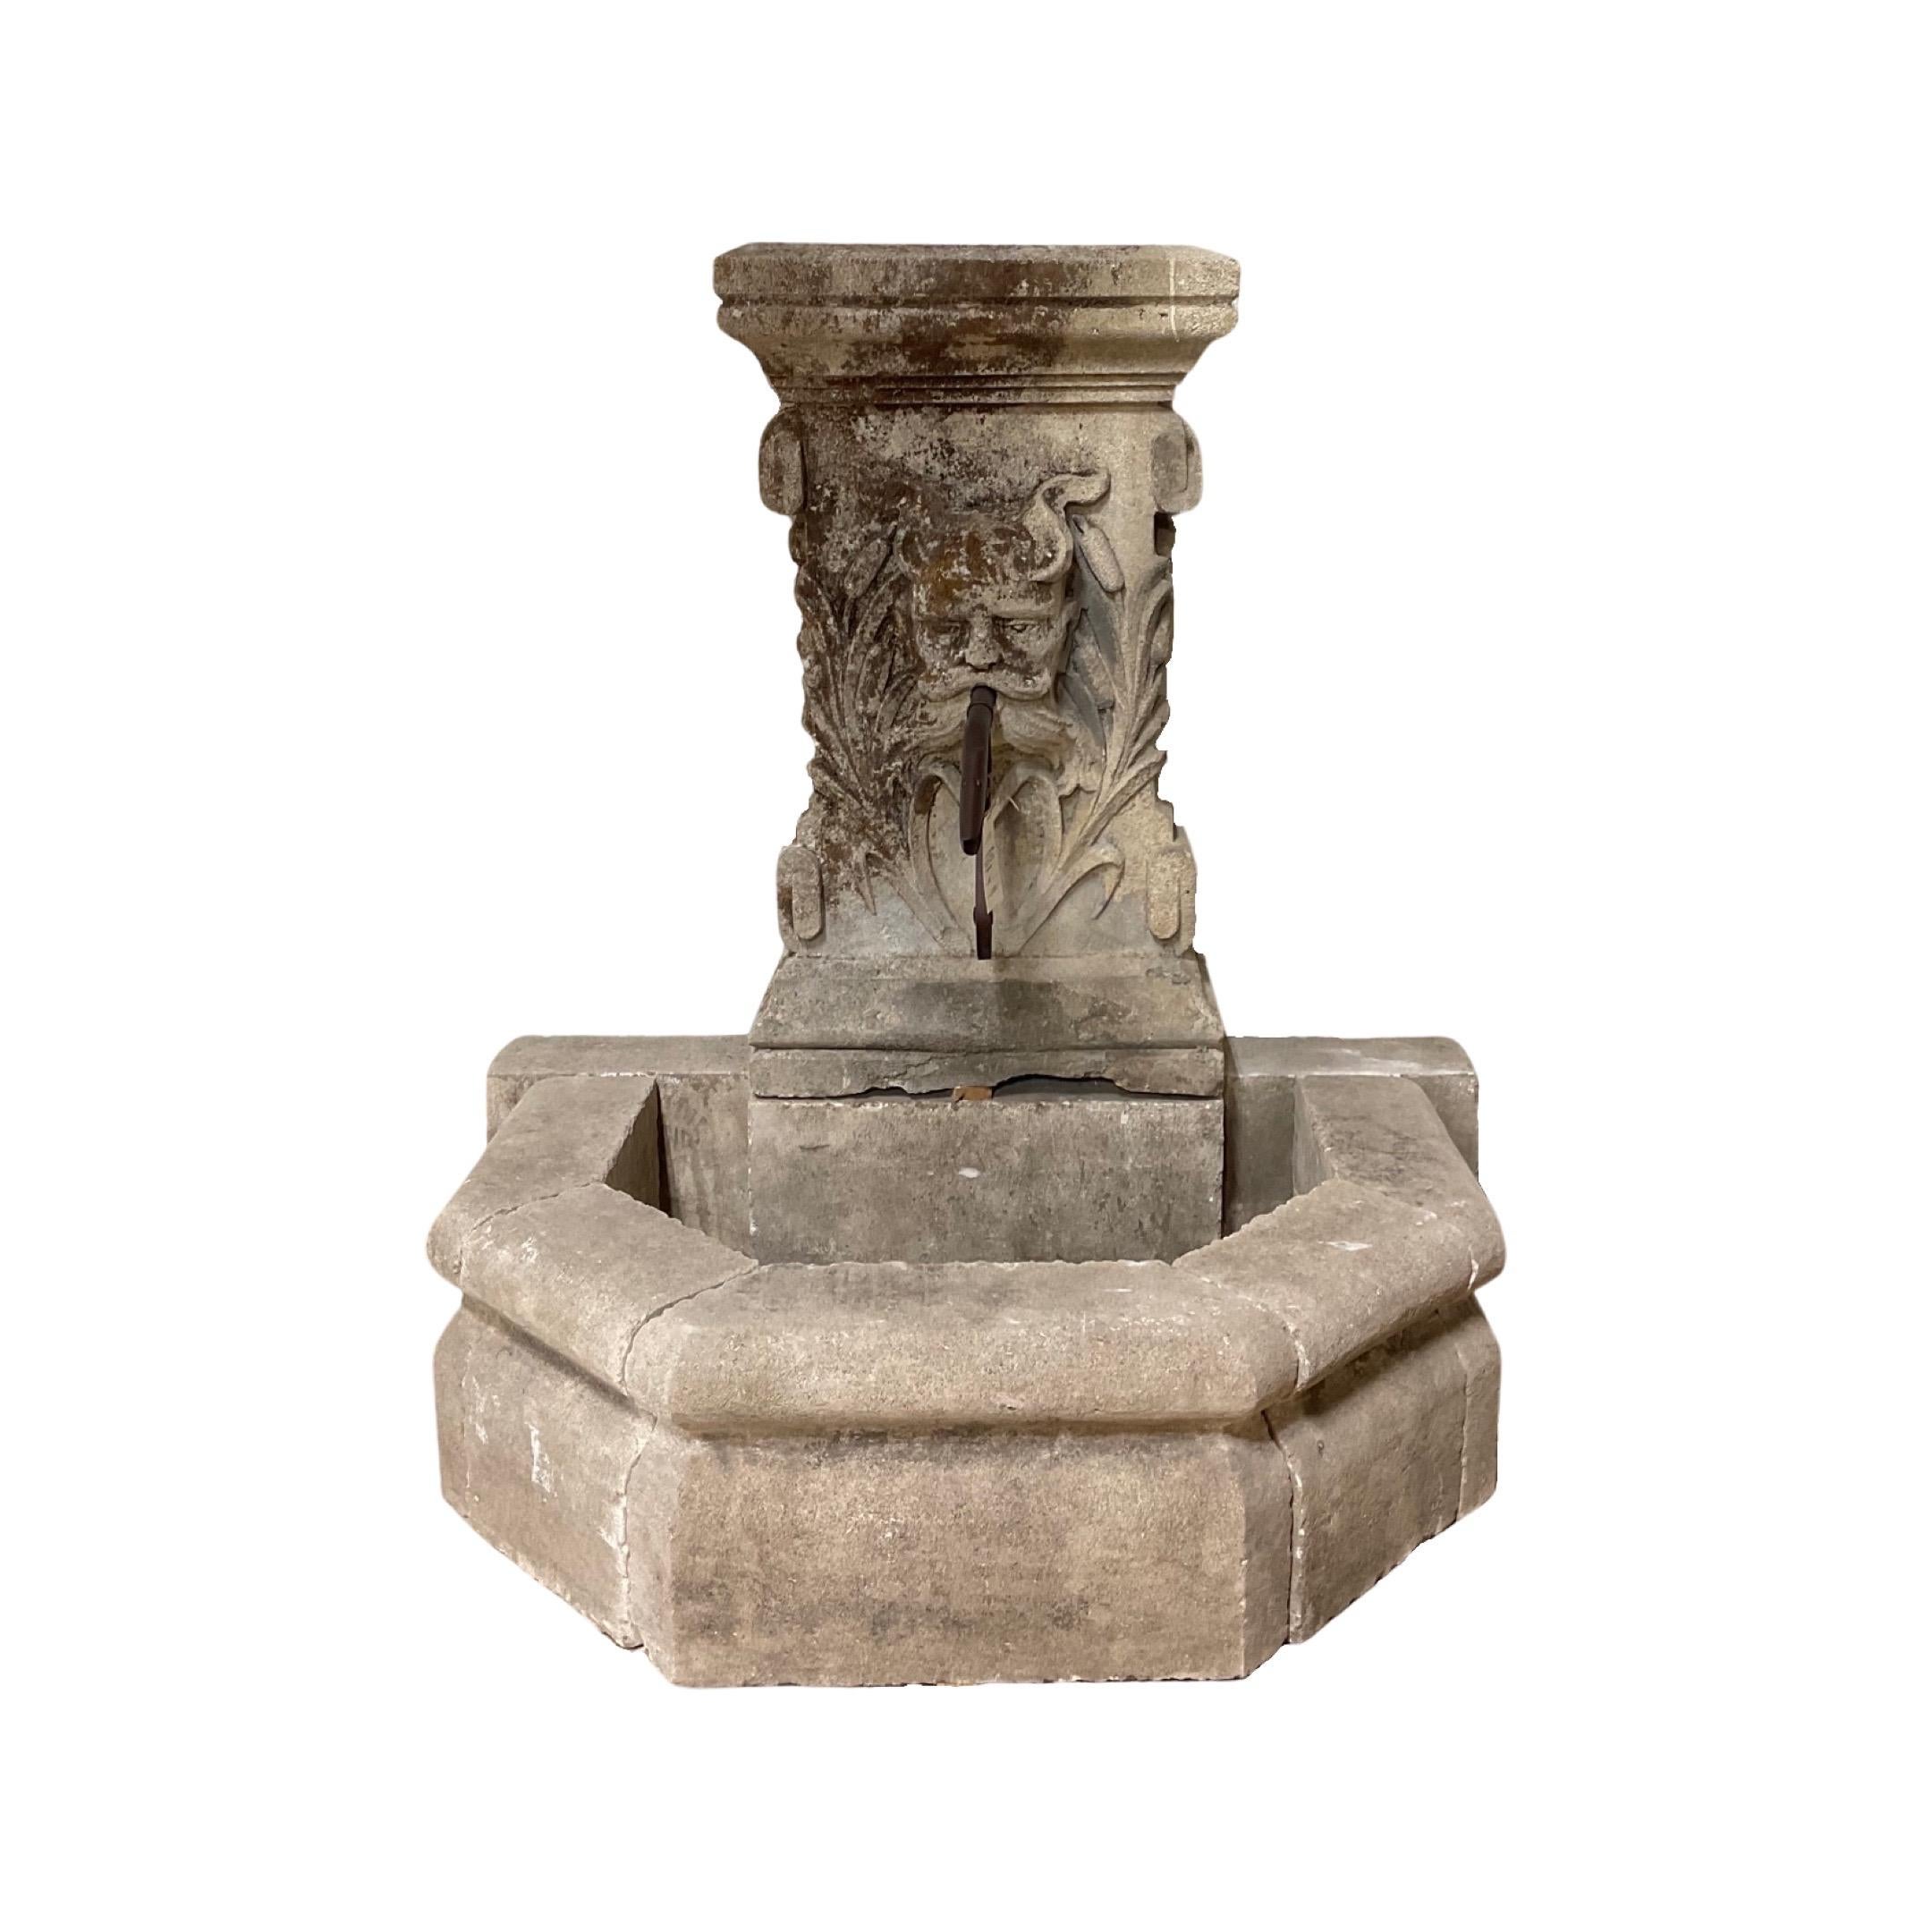 Bring timeless beauty and classic French elegance to your outdoor space with this stunning French Limestone Wall Fountain. Crafted from limestone quarried in the Loire Vallee, this fountain was originally produced in the 1880s and features intricate